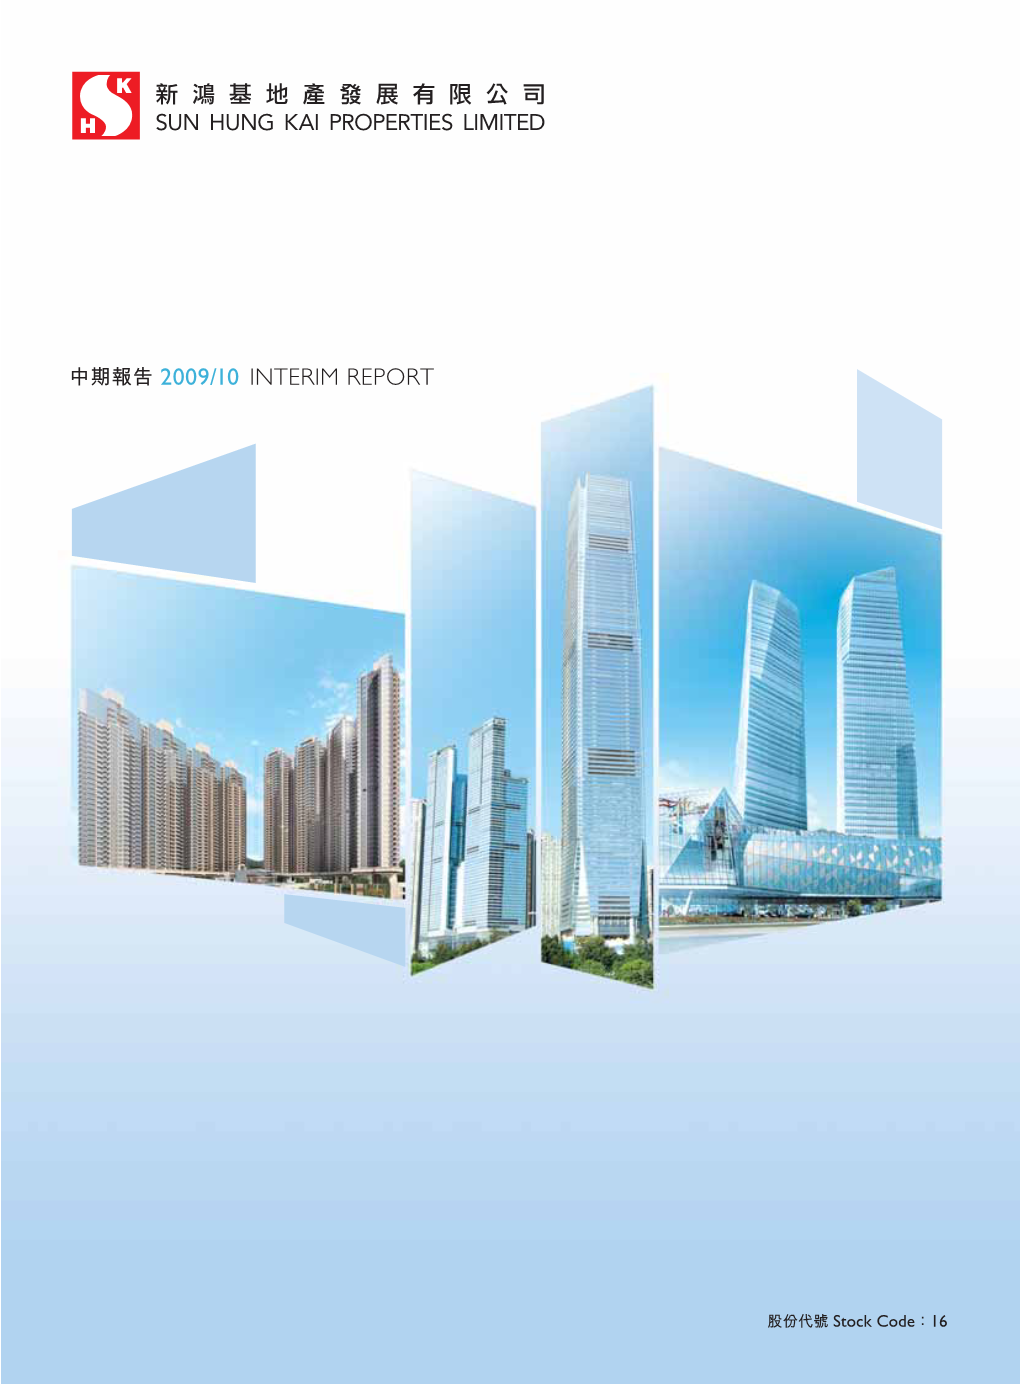 Interim Report 2009/10 SUN HUNG KAI PROPERTIES LIMITED Financial Highlights and Corporate Information